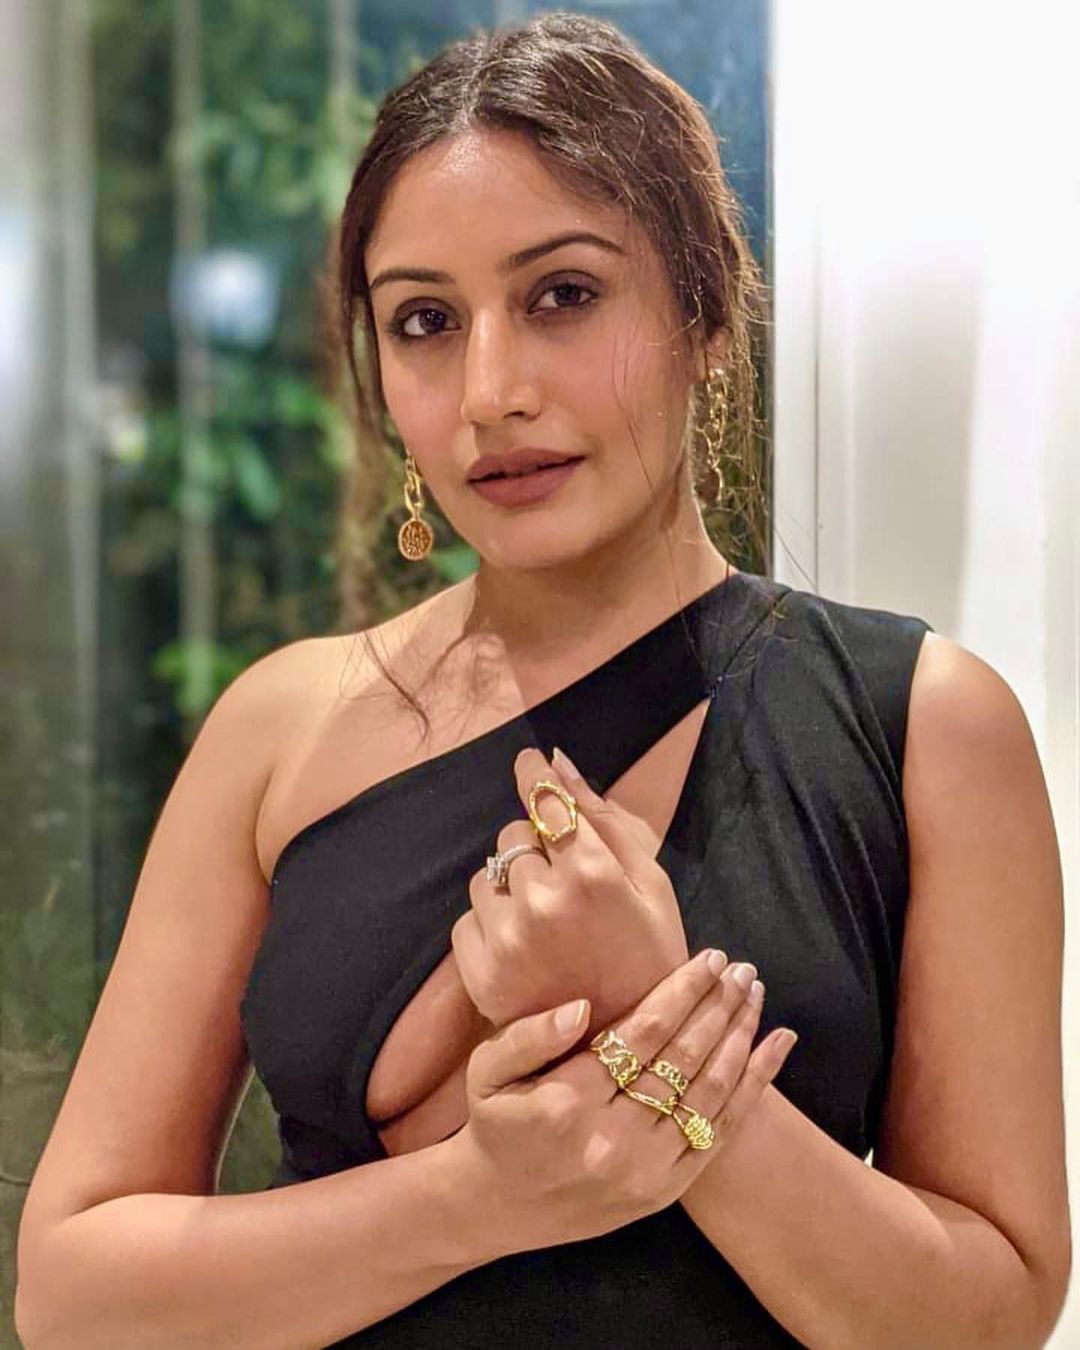 Surbhi Chandna accessorises her look with golden jewellery